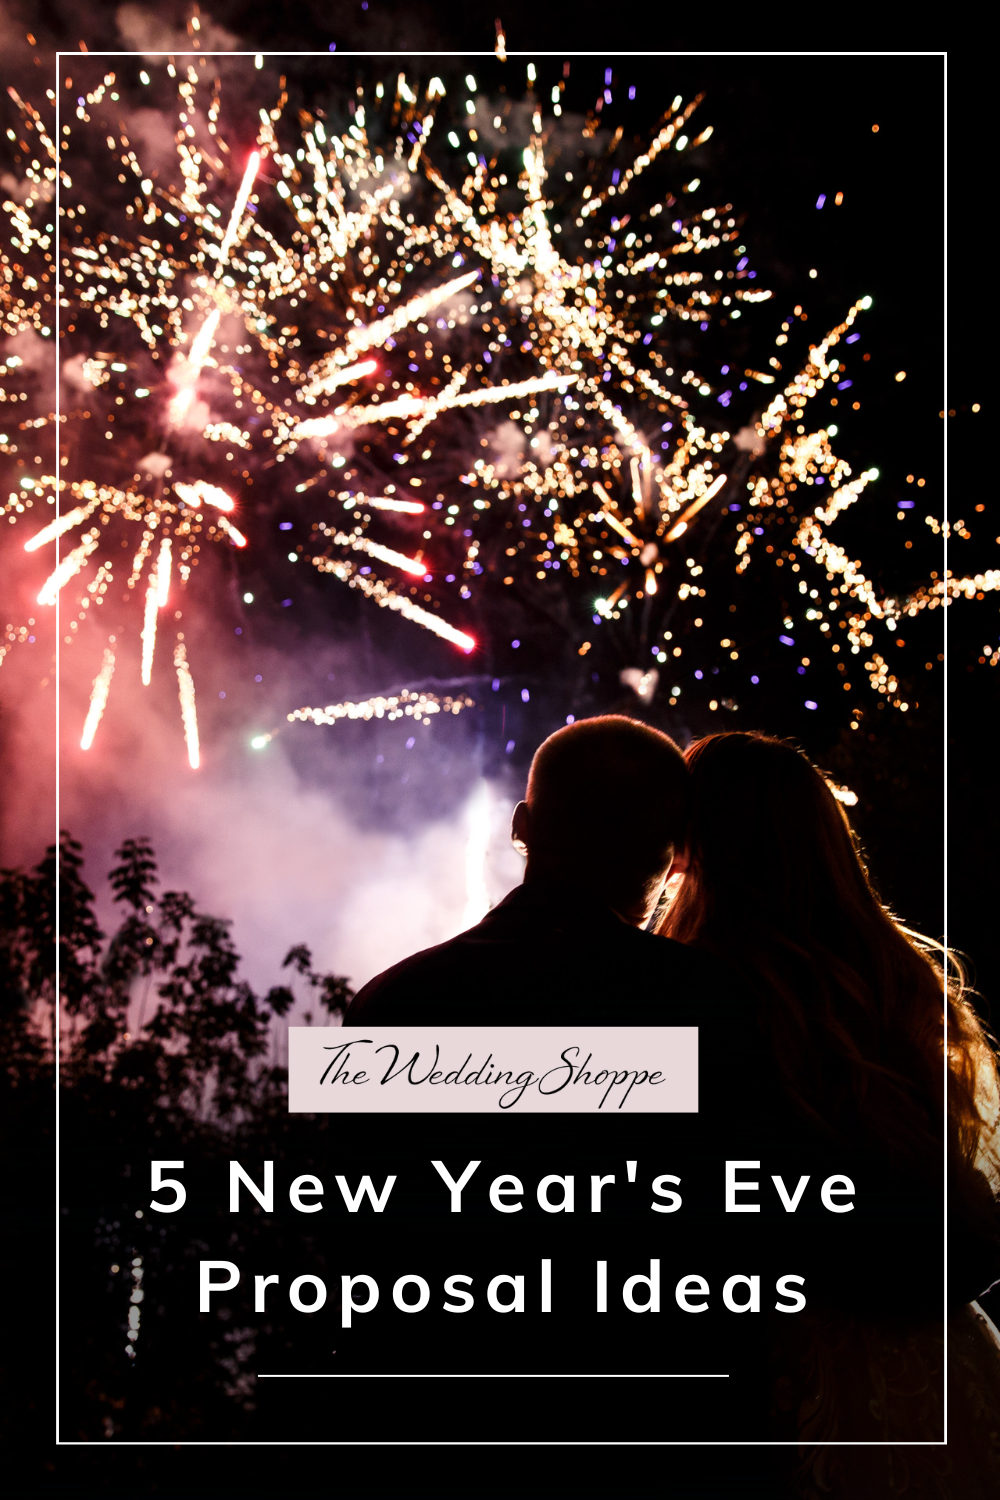 blog post graphic for "5 New Year's Eve Proposal Ideas" from the Wedding Shoppe